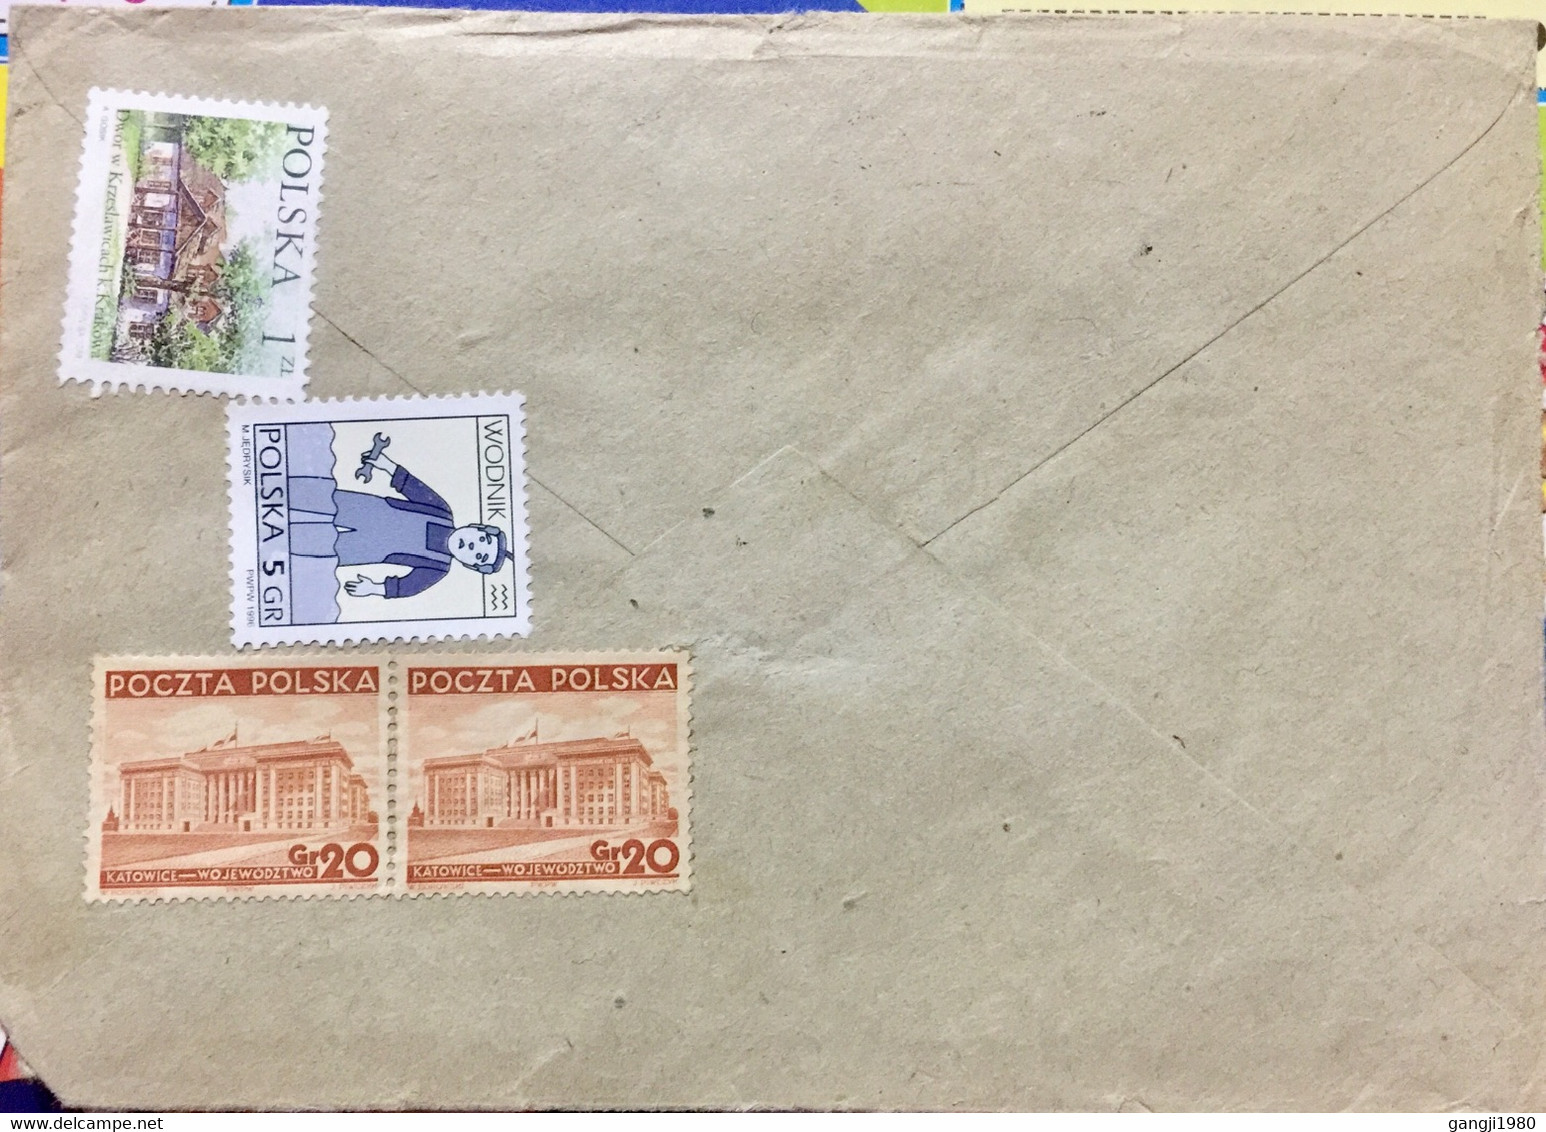 POLAND 2000, USED AIRMAIL COVER TO INDIA 4 DIFFERENT 1958 PICTURAL SPECIAL CANCELLATION, KATOWIDE ,HOUSE MUSIC,BUILDIN, - Storia Postale